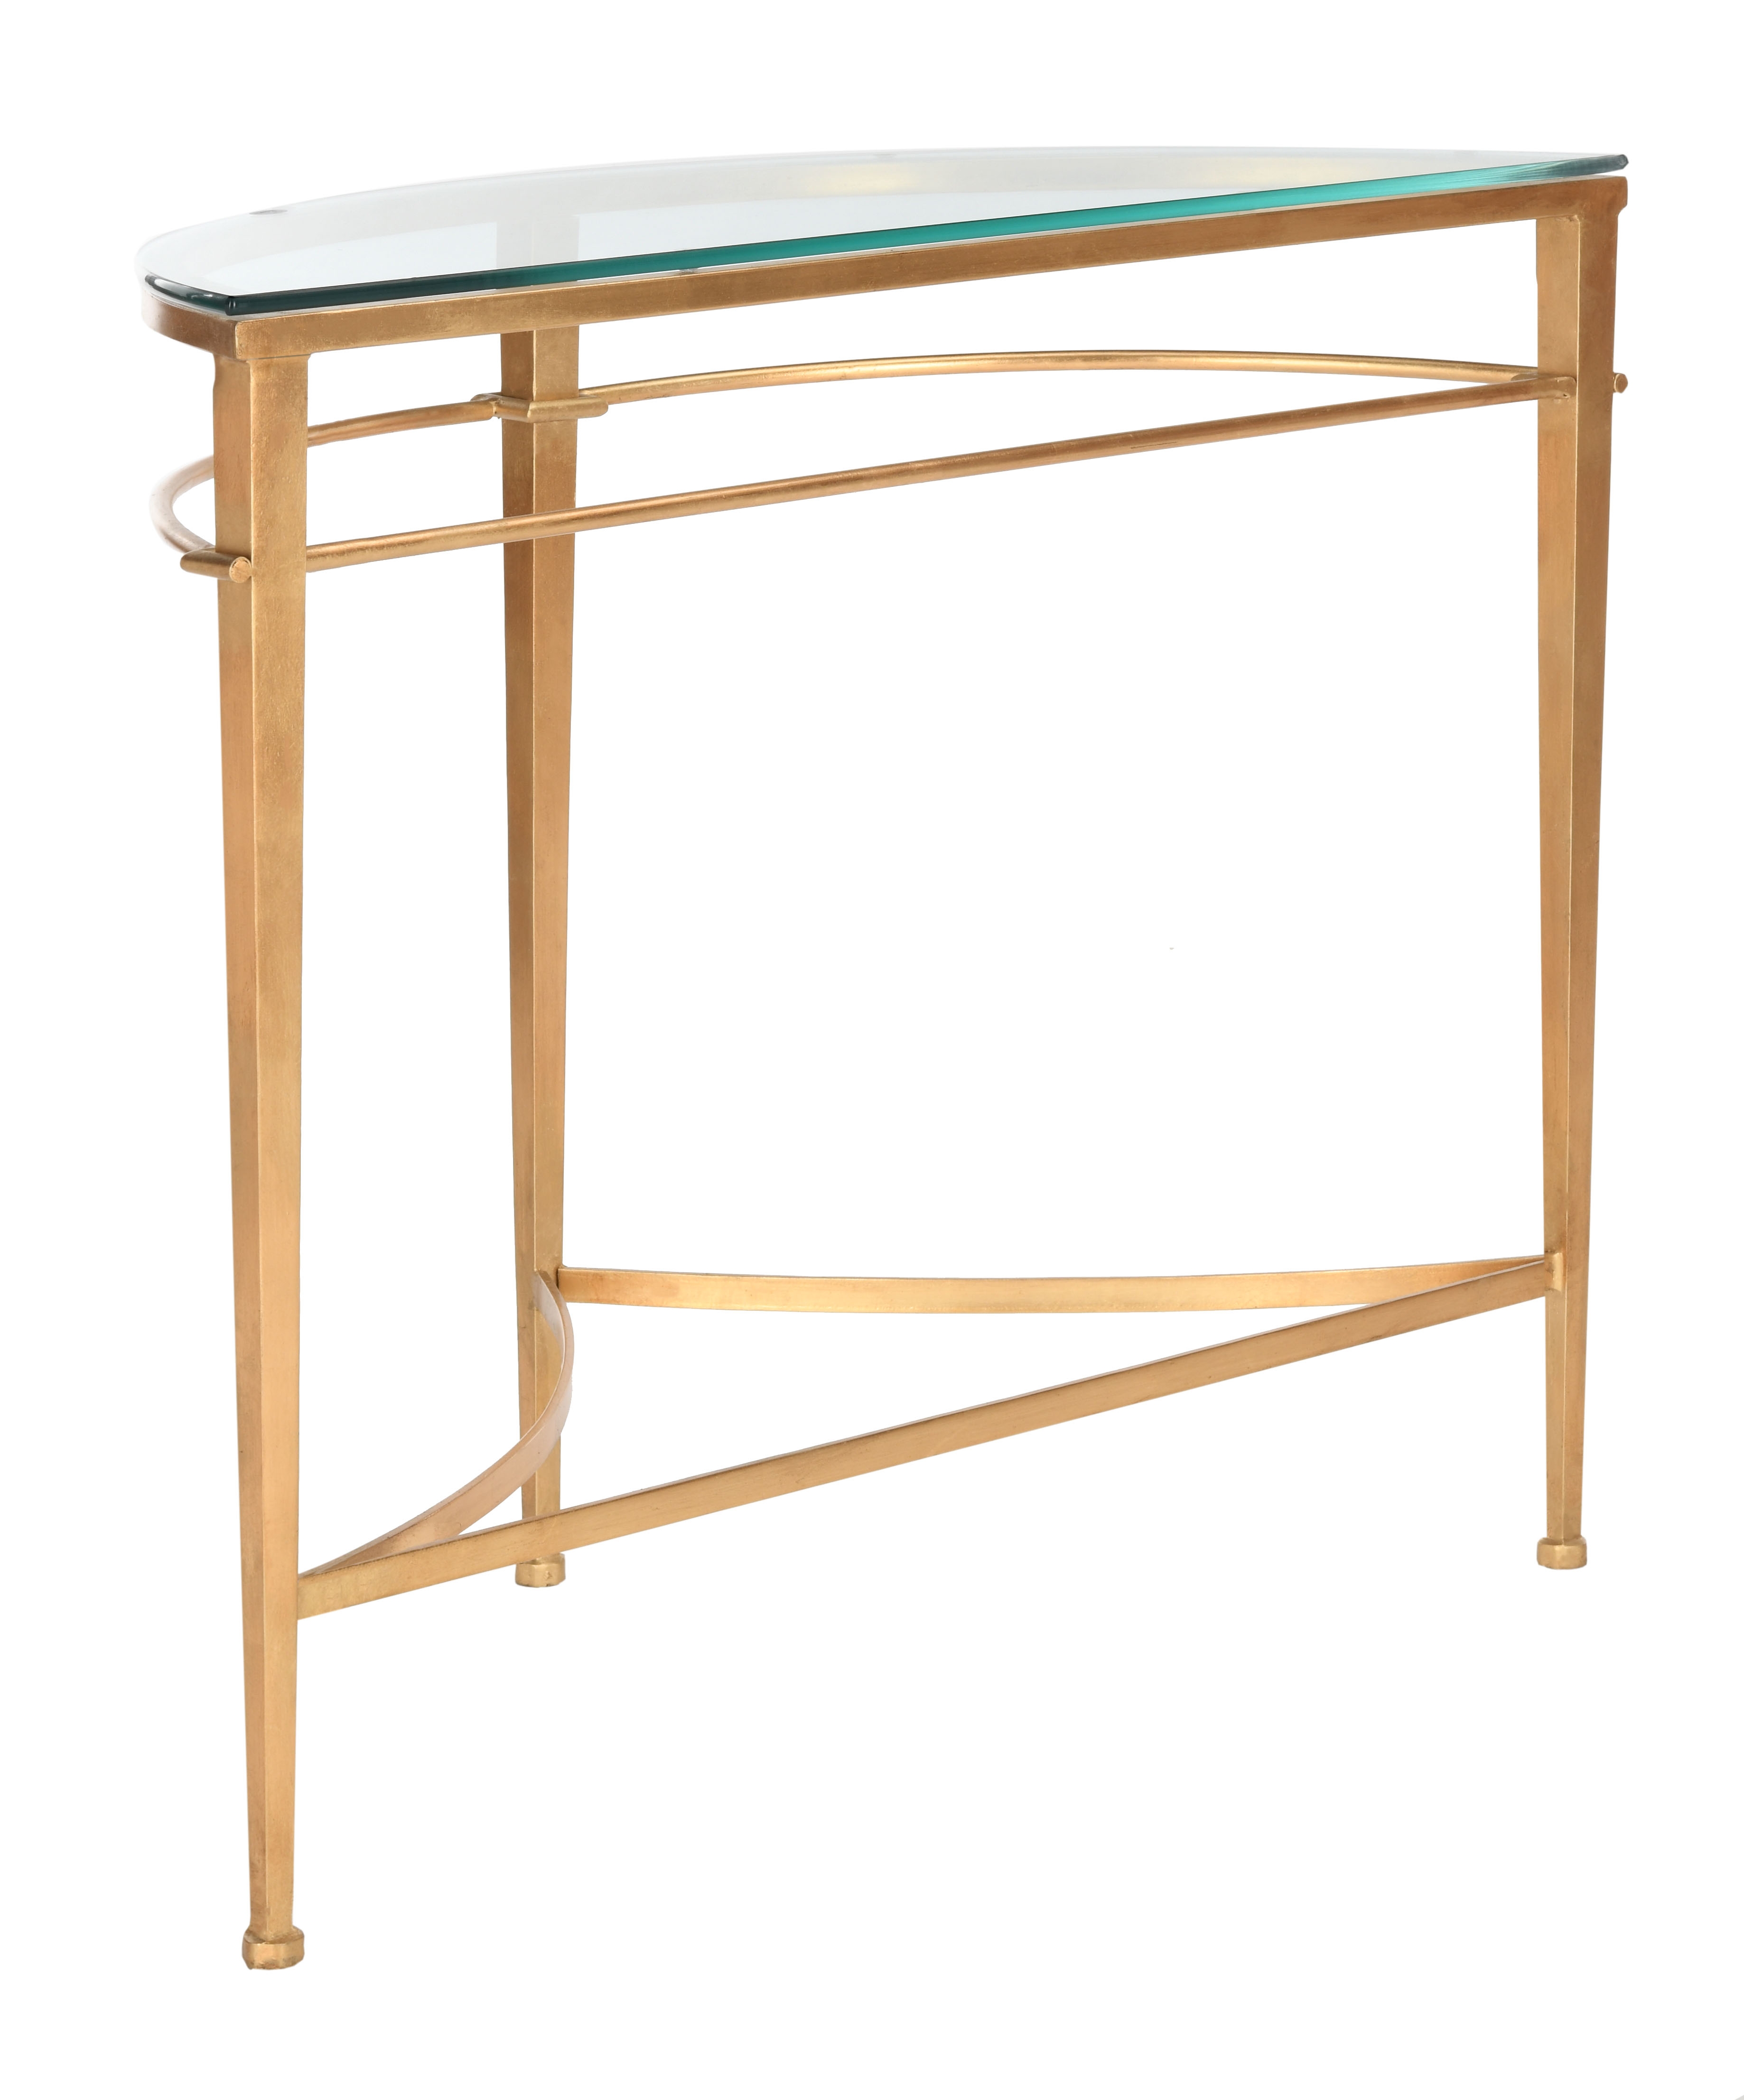 Baur Glass Console Table - Gold - Arlo Home - Image 0